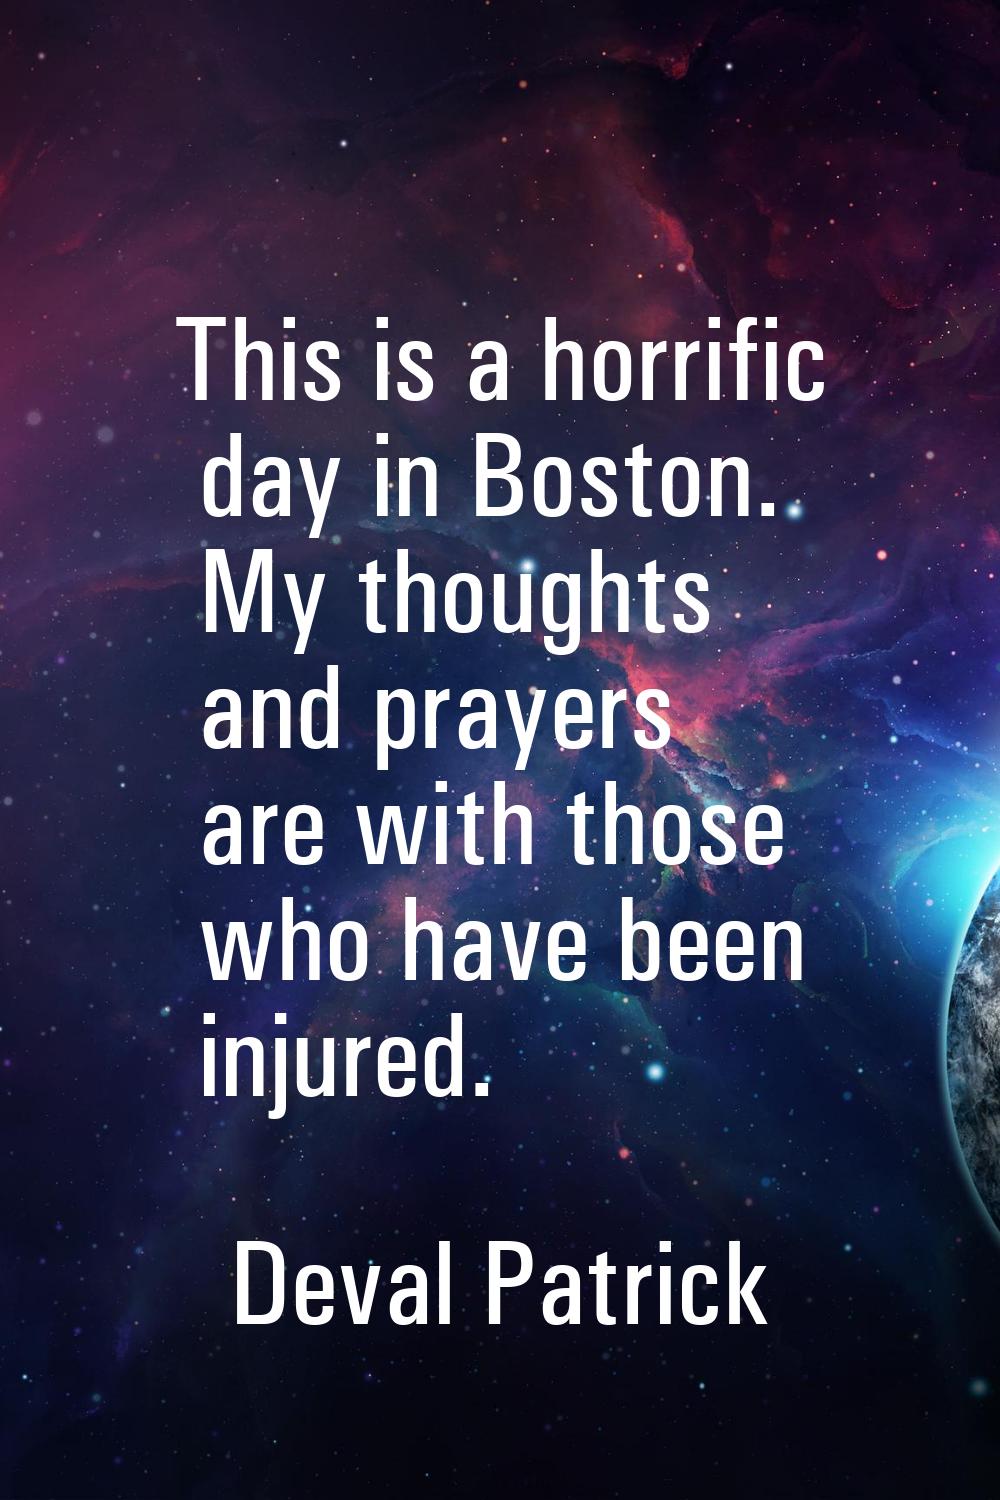 This is a horrific day in Boston. My thoughts and prayers are with those who have been injured.